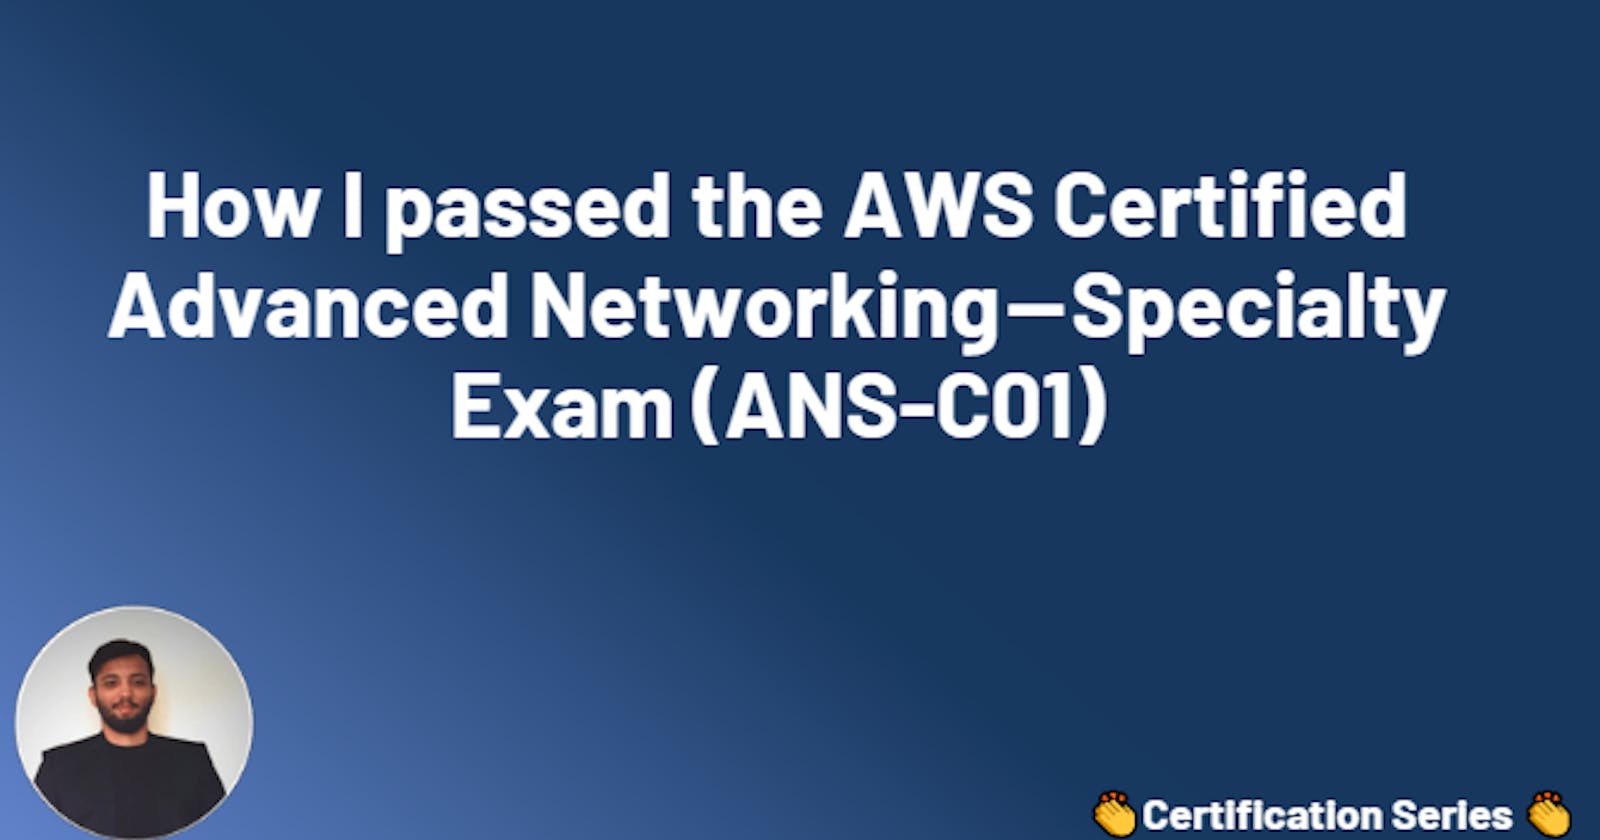 How I passed the AWS Certified Advanced Networking — Specialty Exam (ANS-C01)